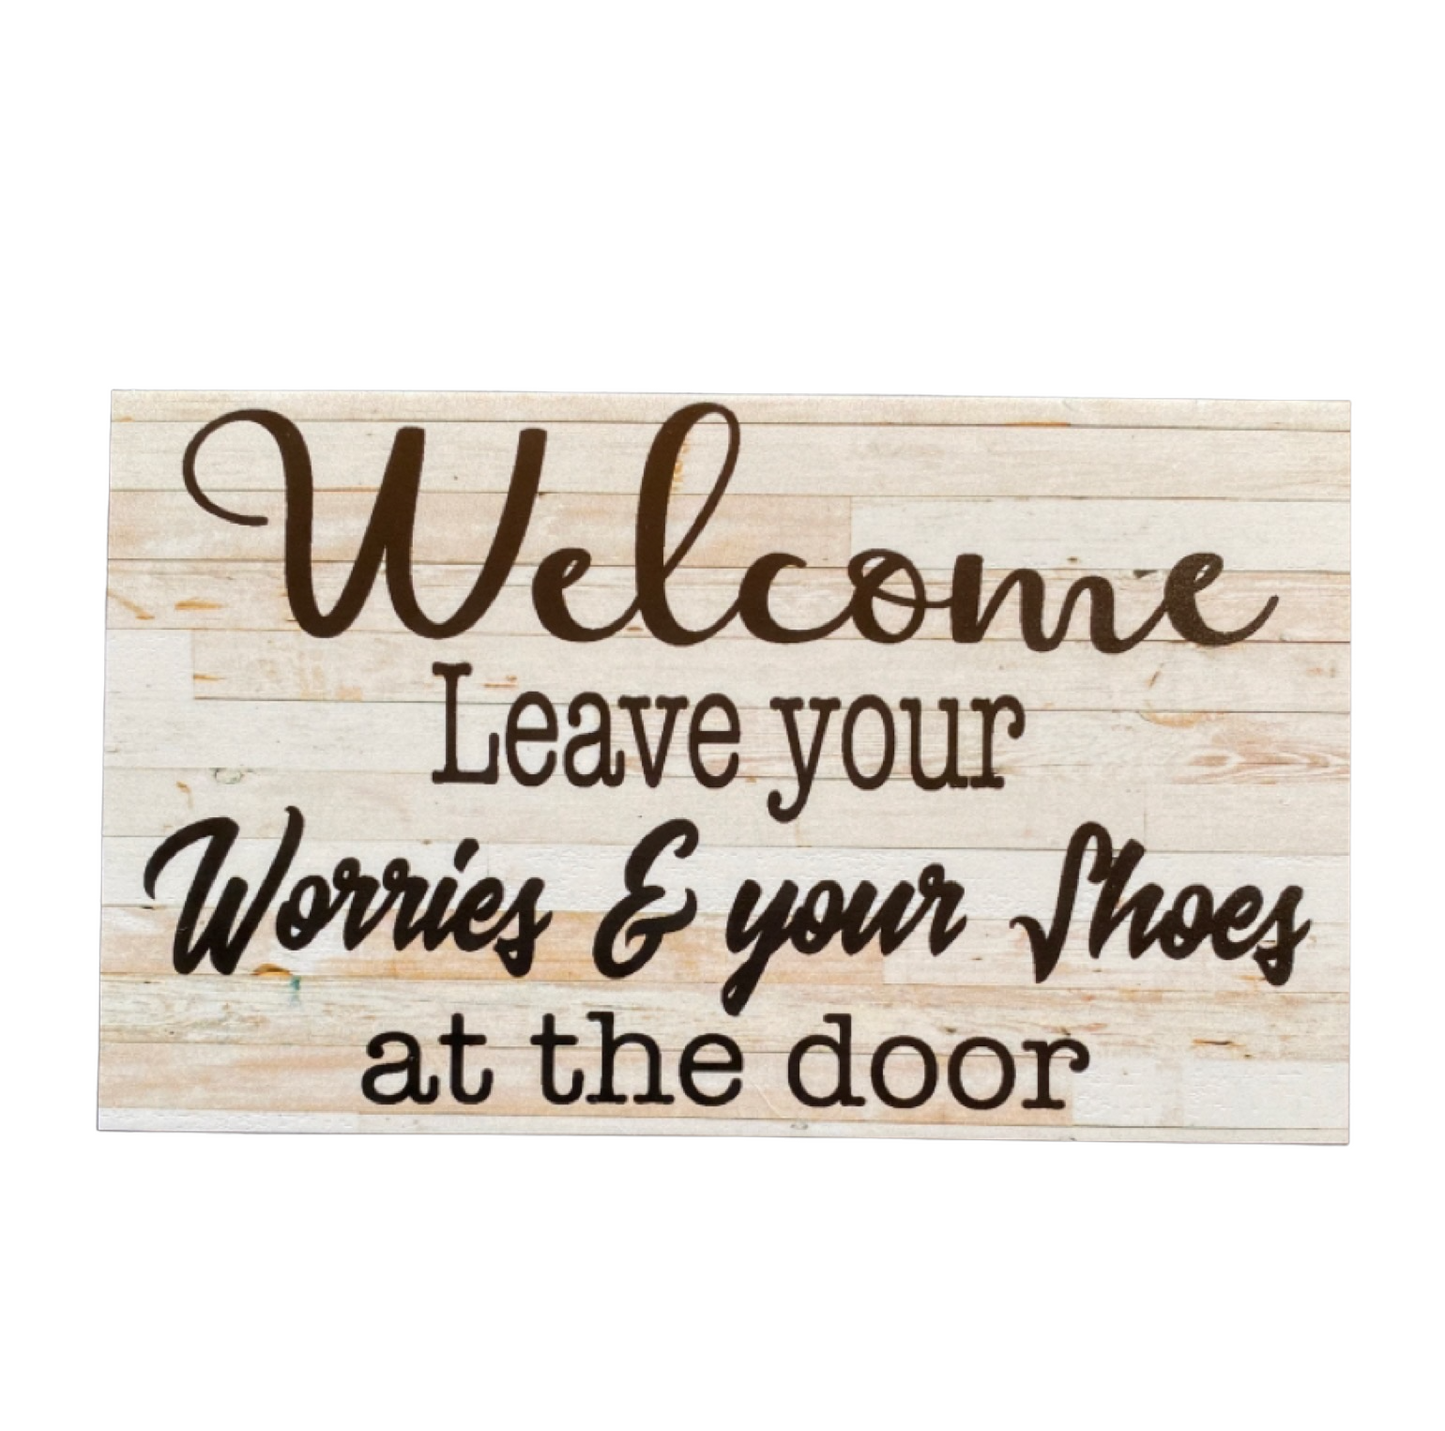 Welcome Leave Your Worries Shoes At The Door French Sign